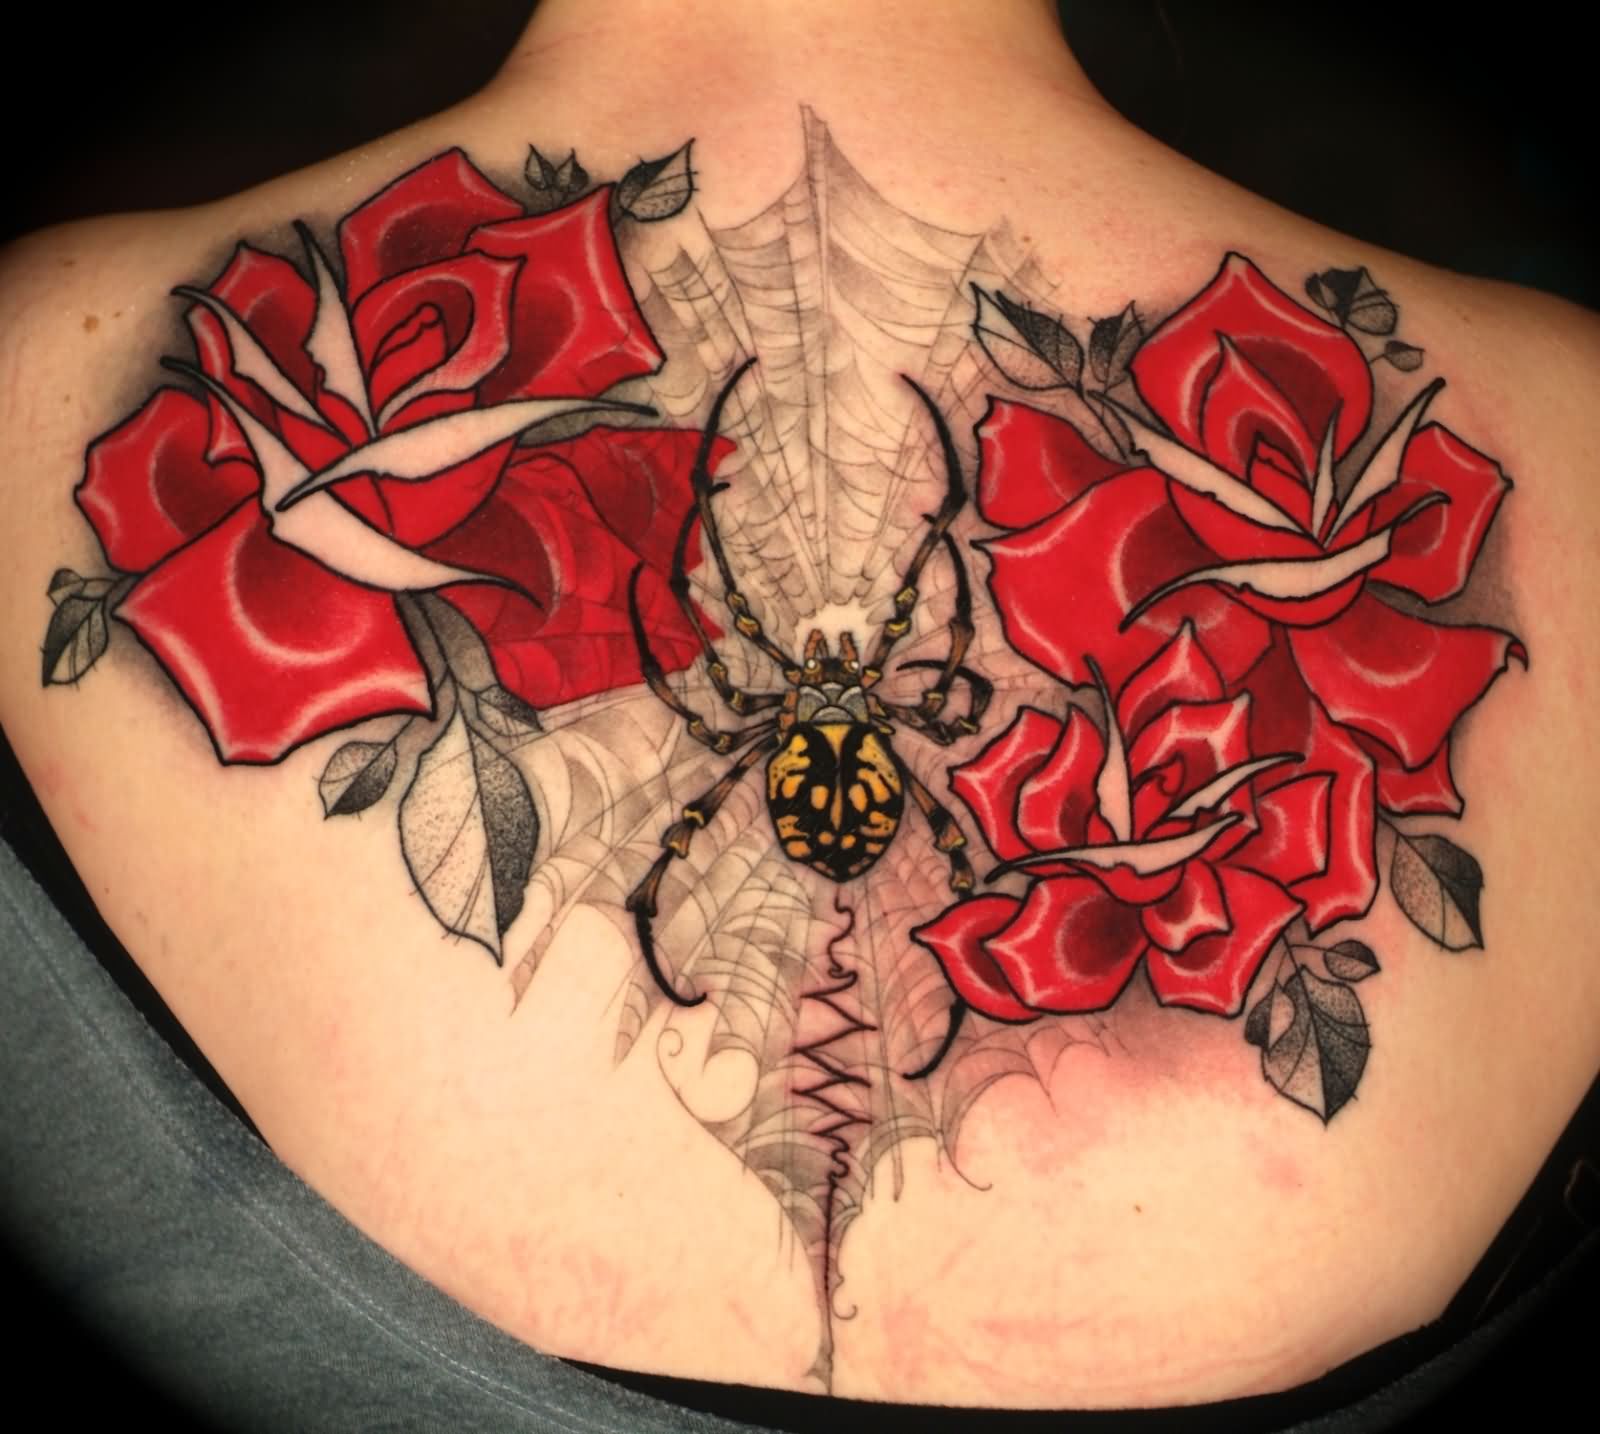 Spider With Roses Tattoo On Women Upper Back